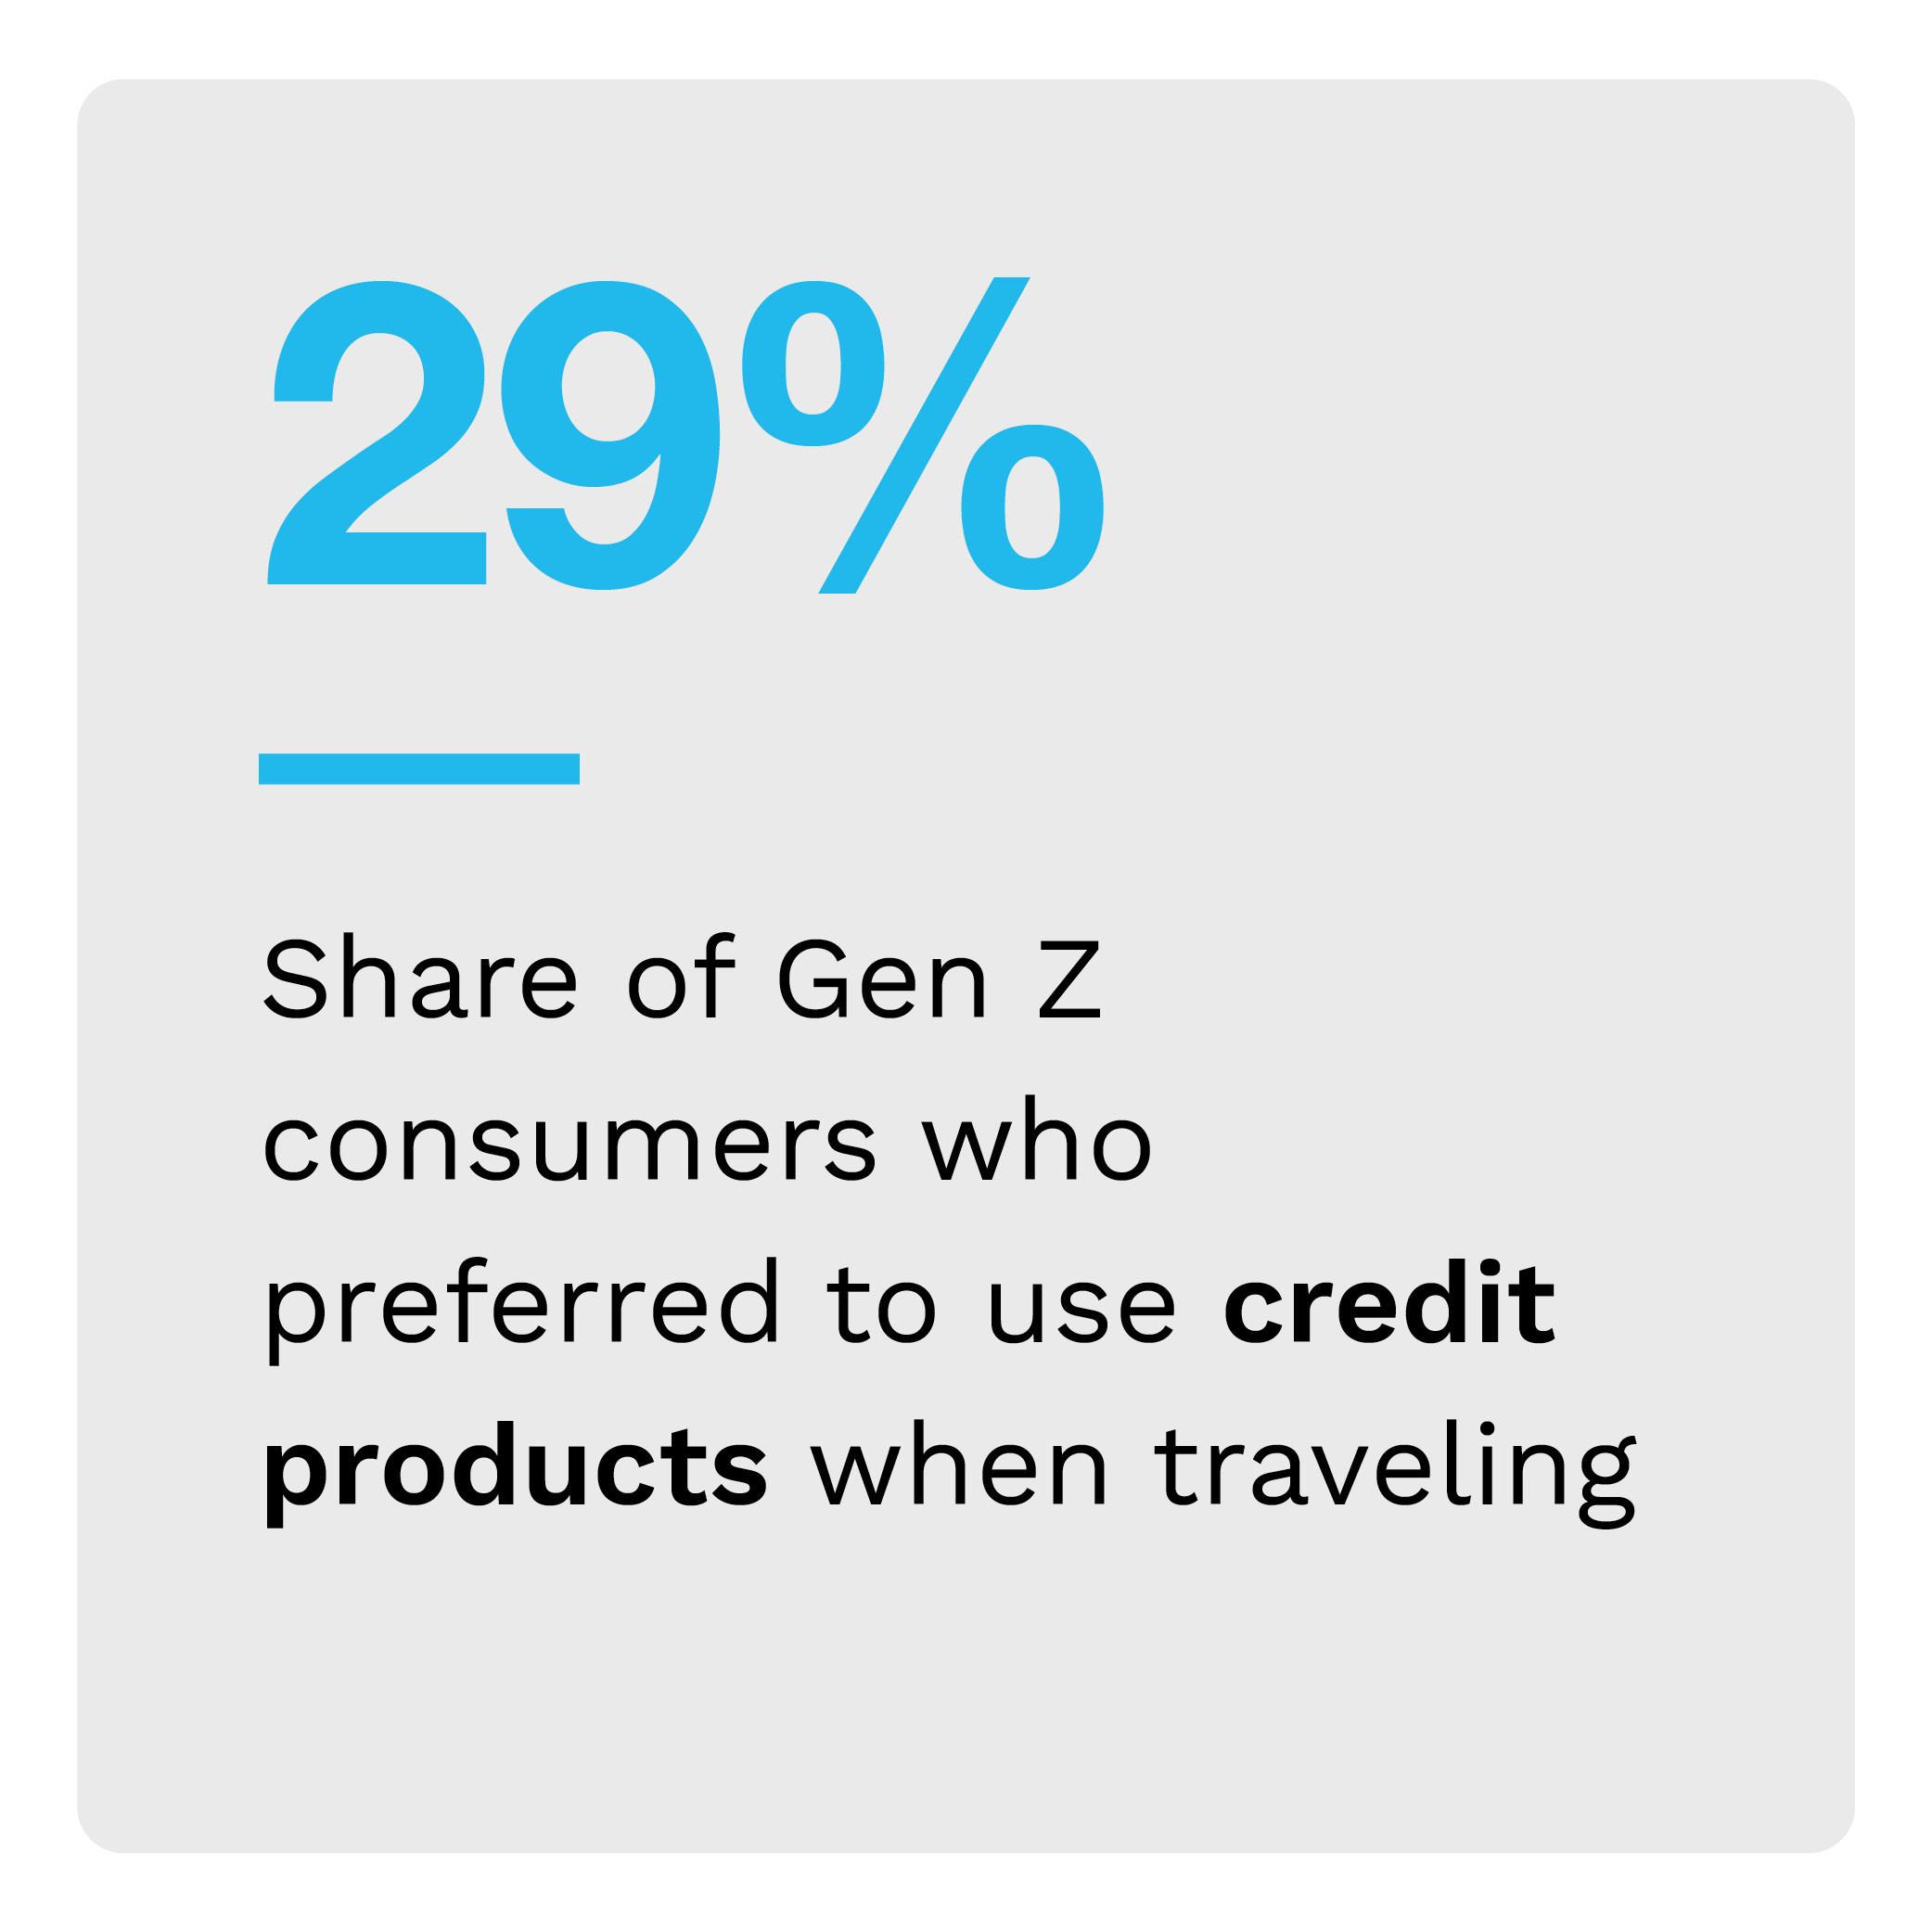 29%: Share of Gen Z consumers who preferred to use credit products when traveling